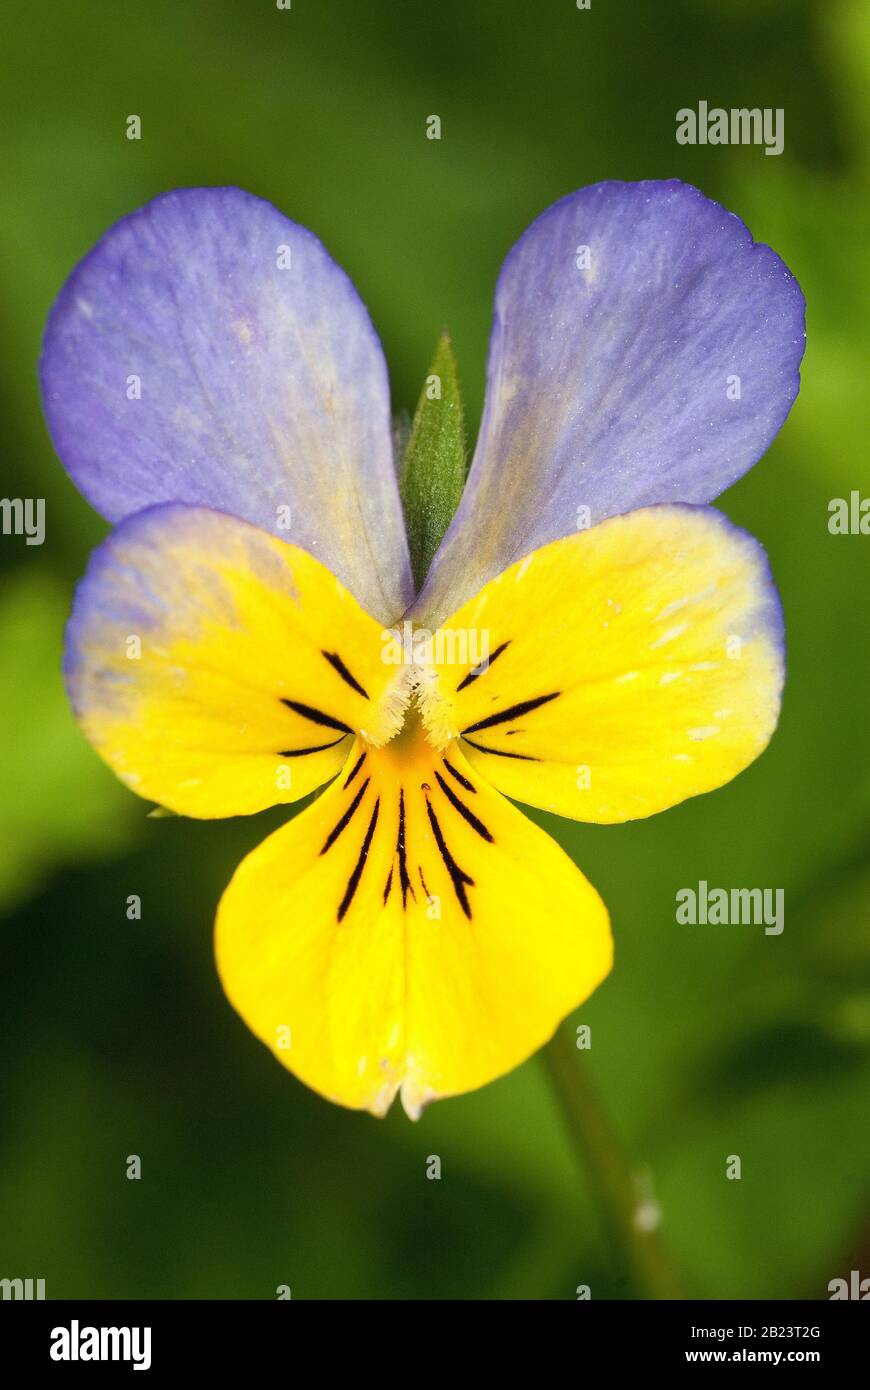 Viola tricolor, detail of the flowers in their natural environment Stock Photo